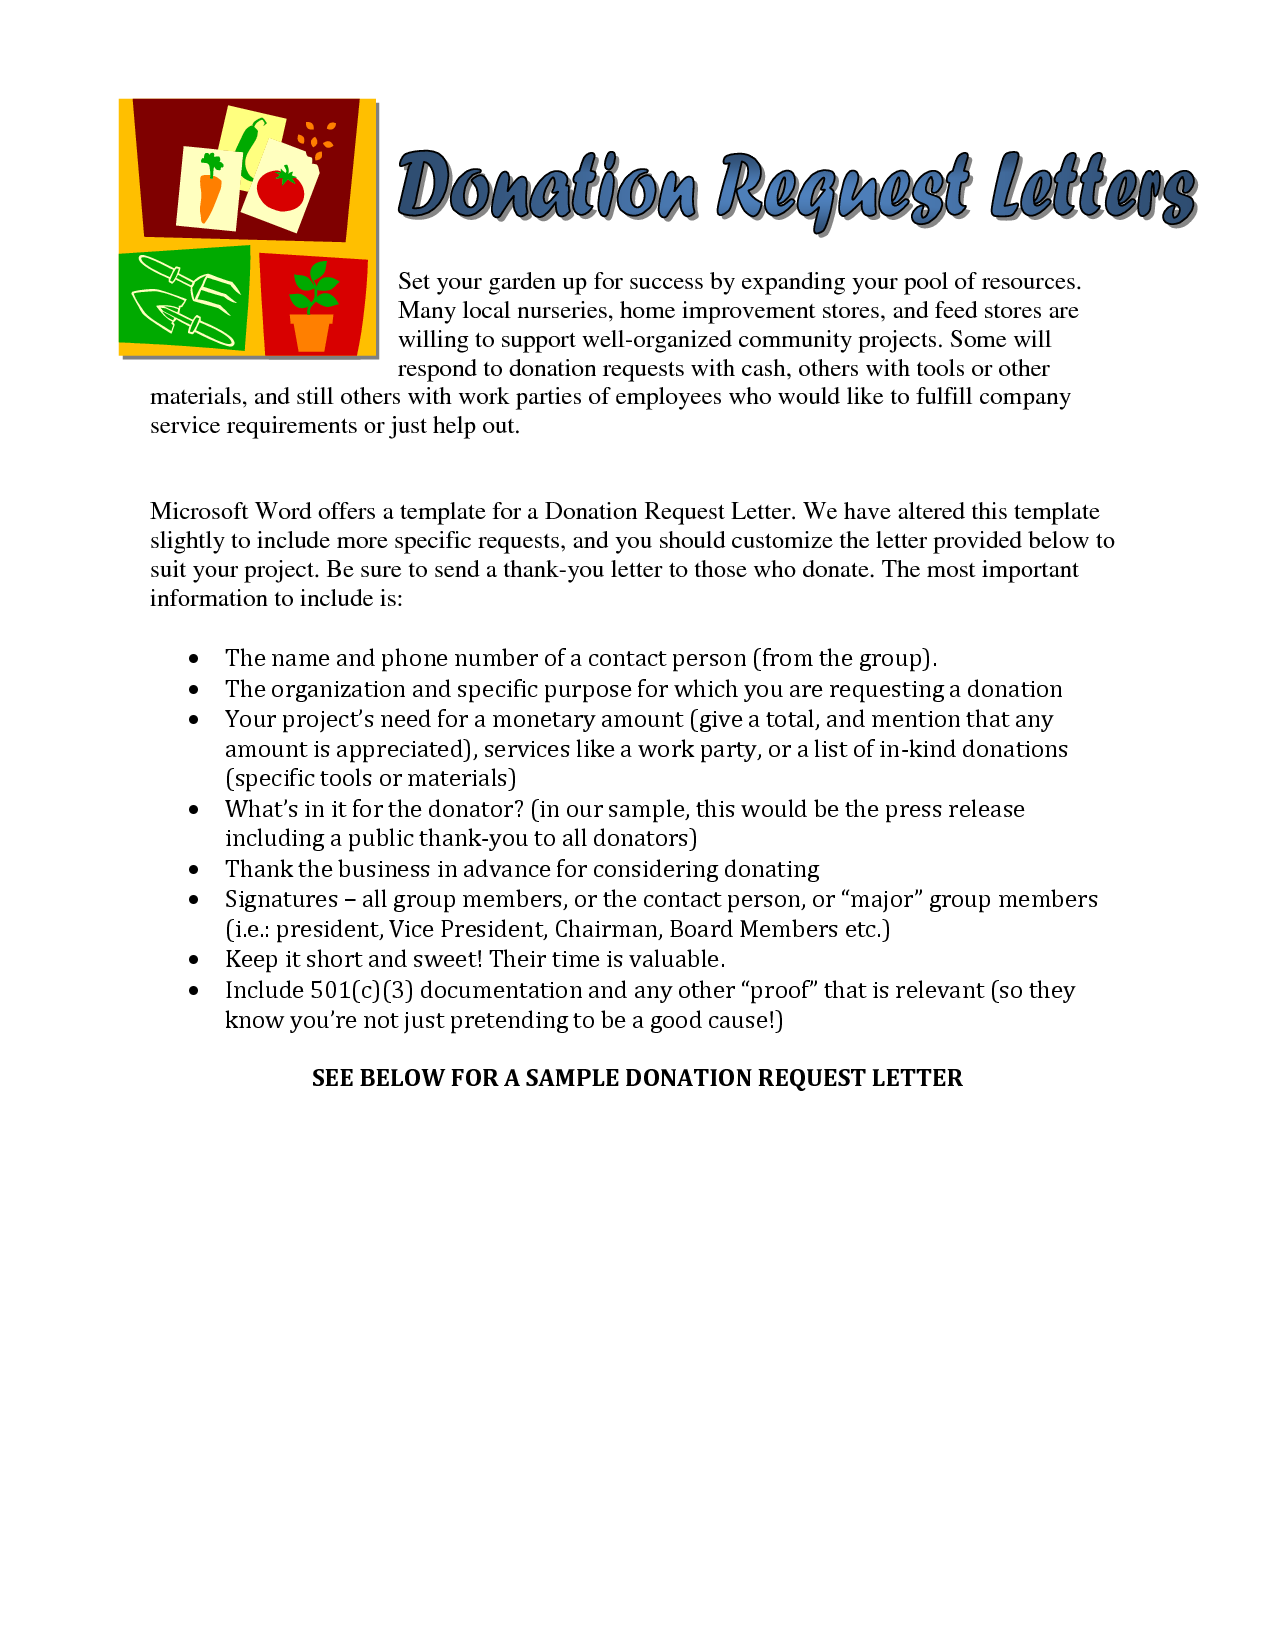 Fundraising Request Letter   A request for donation asks for 